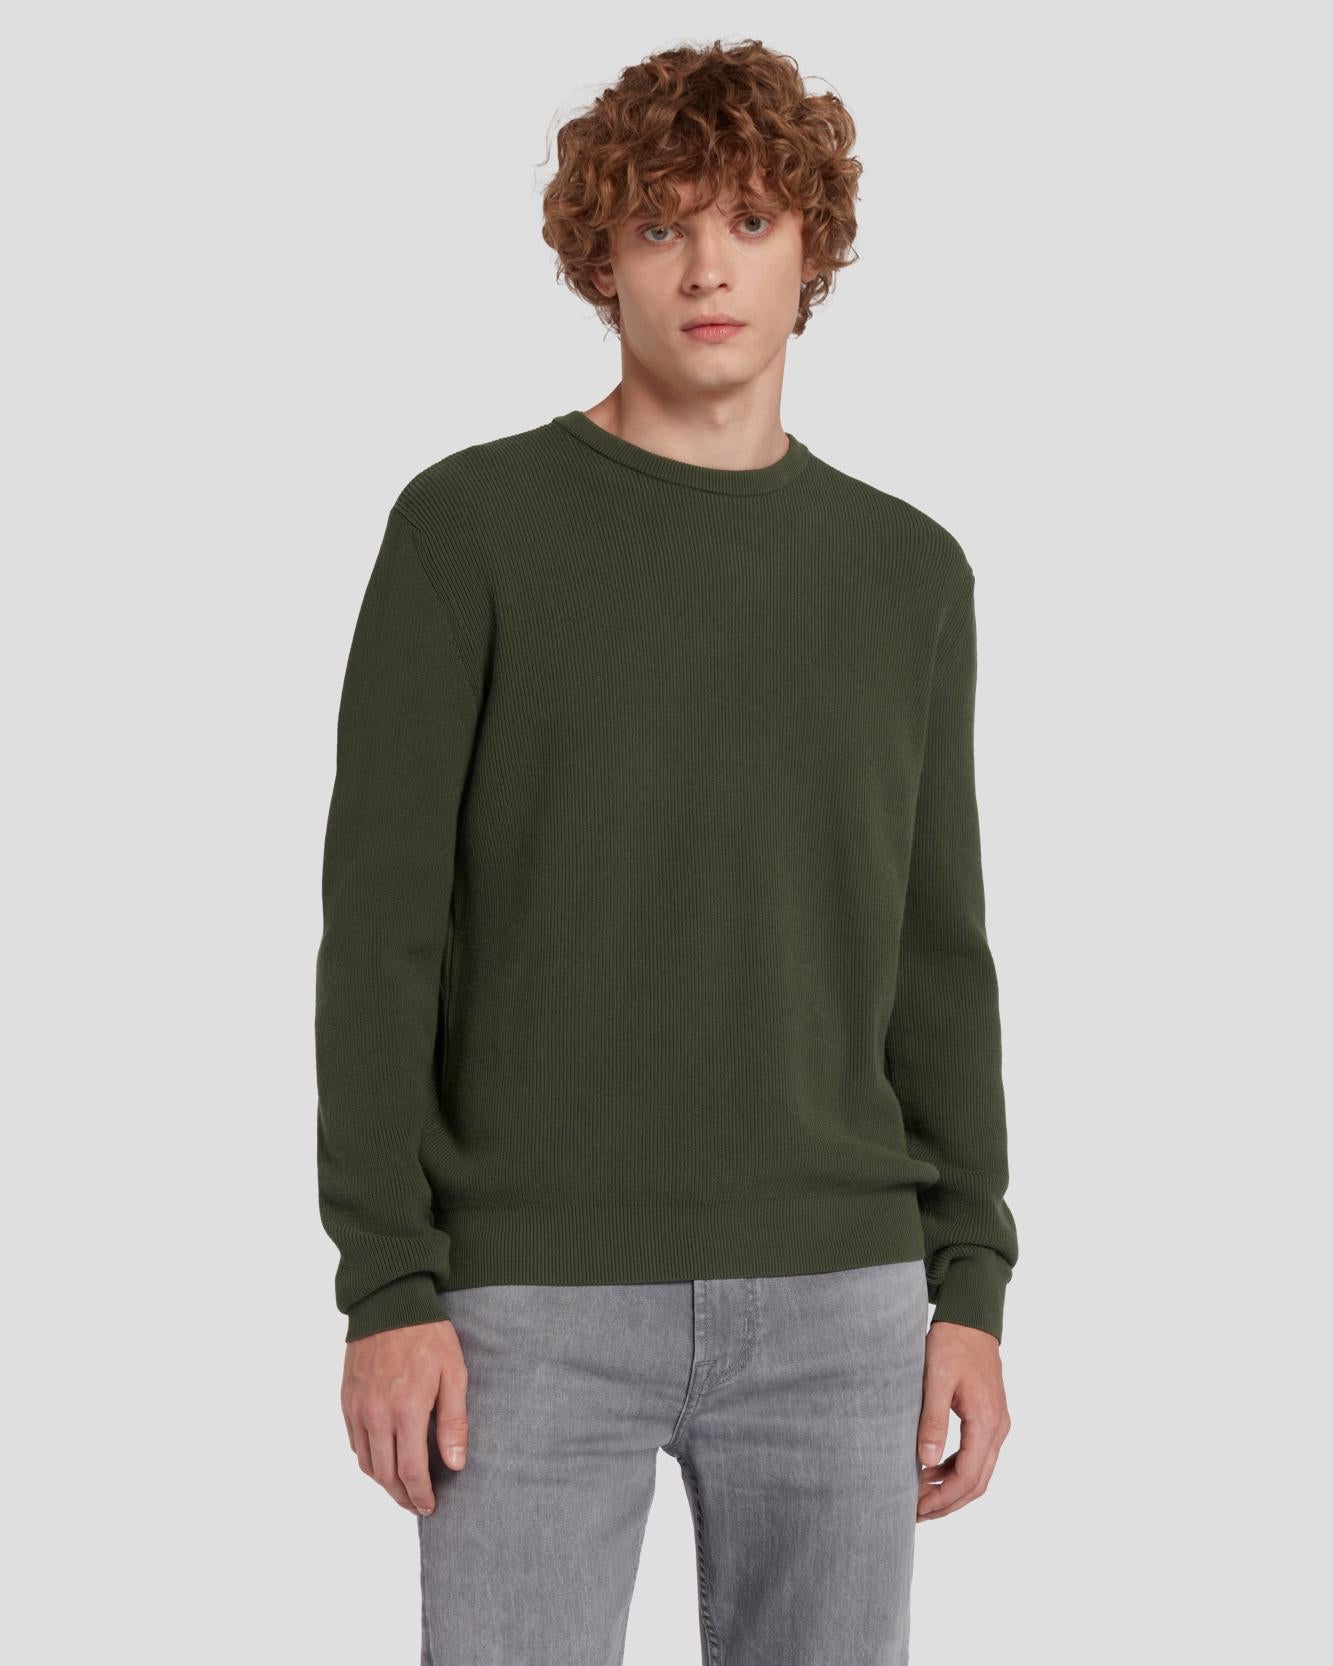 Luxe Performance Ribbed Sweater in Army_ | 7 For All Mankind